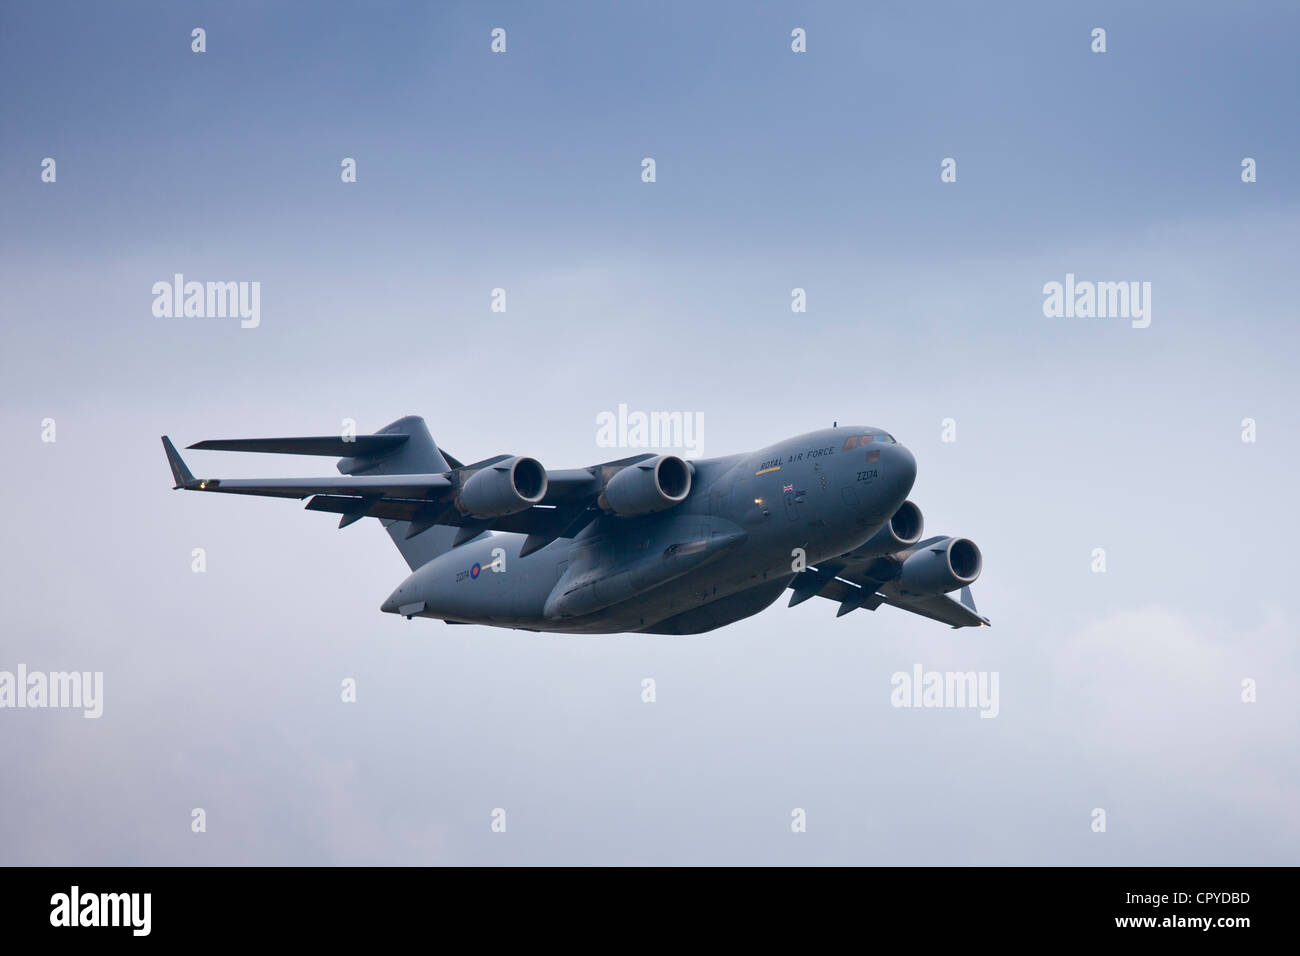 RAF C17 Globemaster air transport troop and cargo plane at RAF Brize Norton Air Base in Oxfordshire, UK Stock Photo